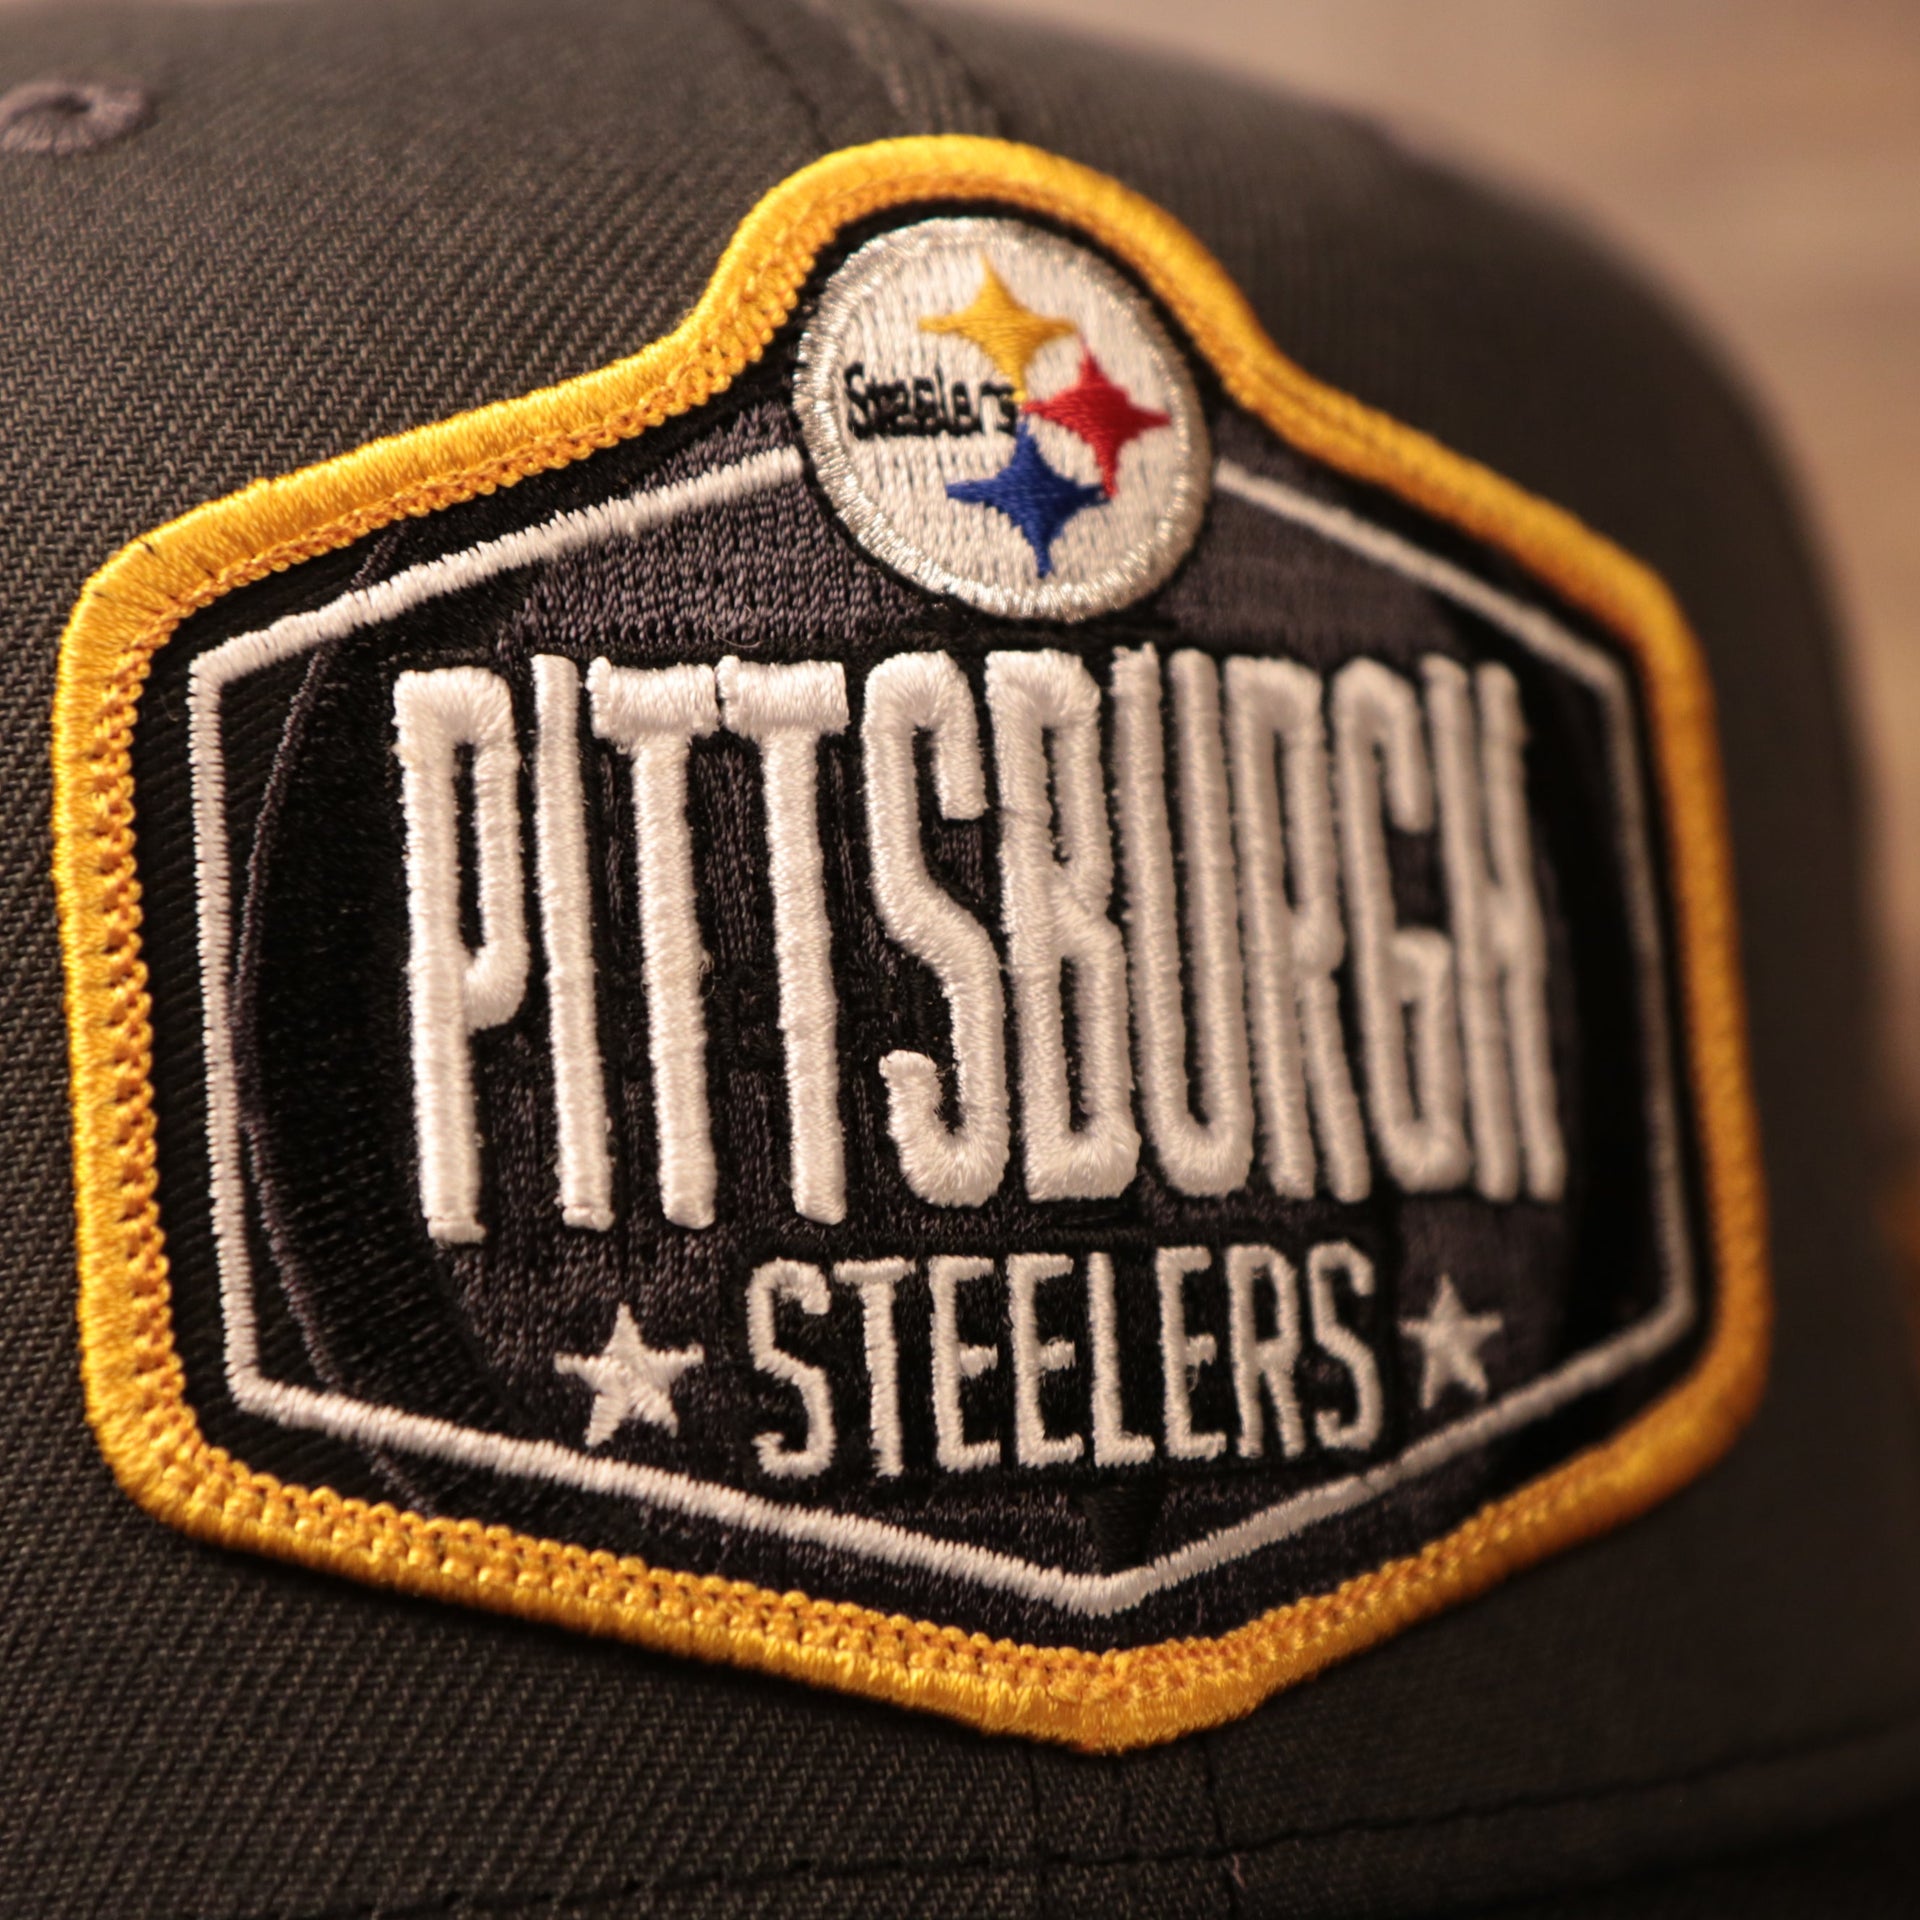 The Pittsburgh Steelers logo on the front of the gray/black meshback 2021 NFL draft trucker hat.